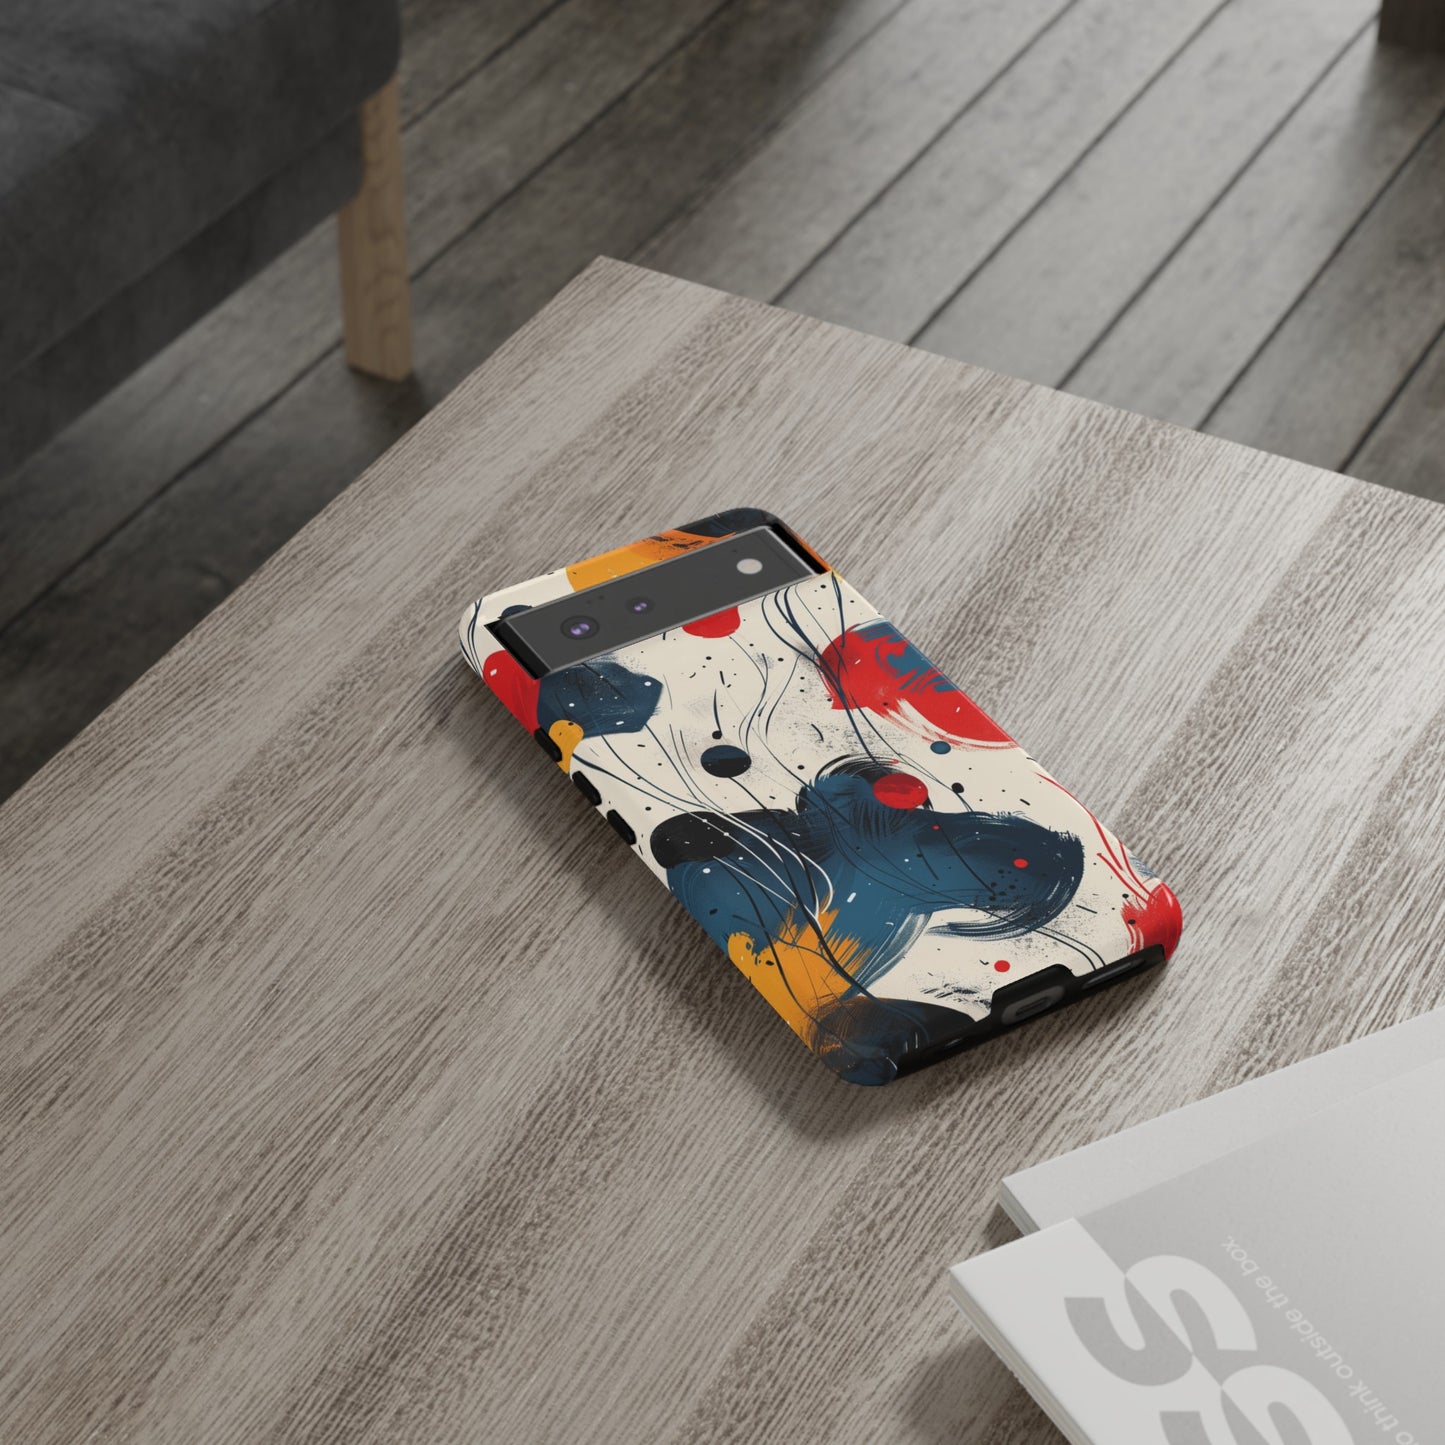 Painting Phone Case